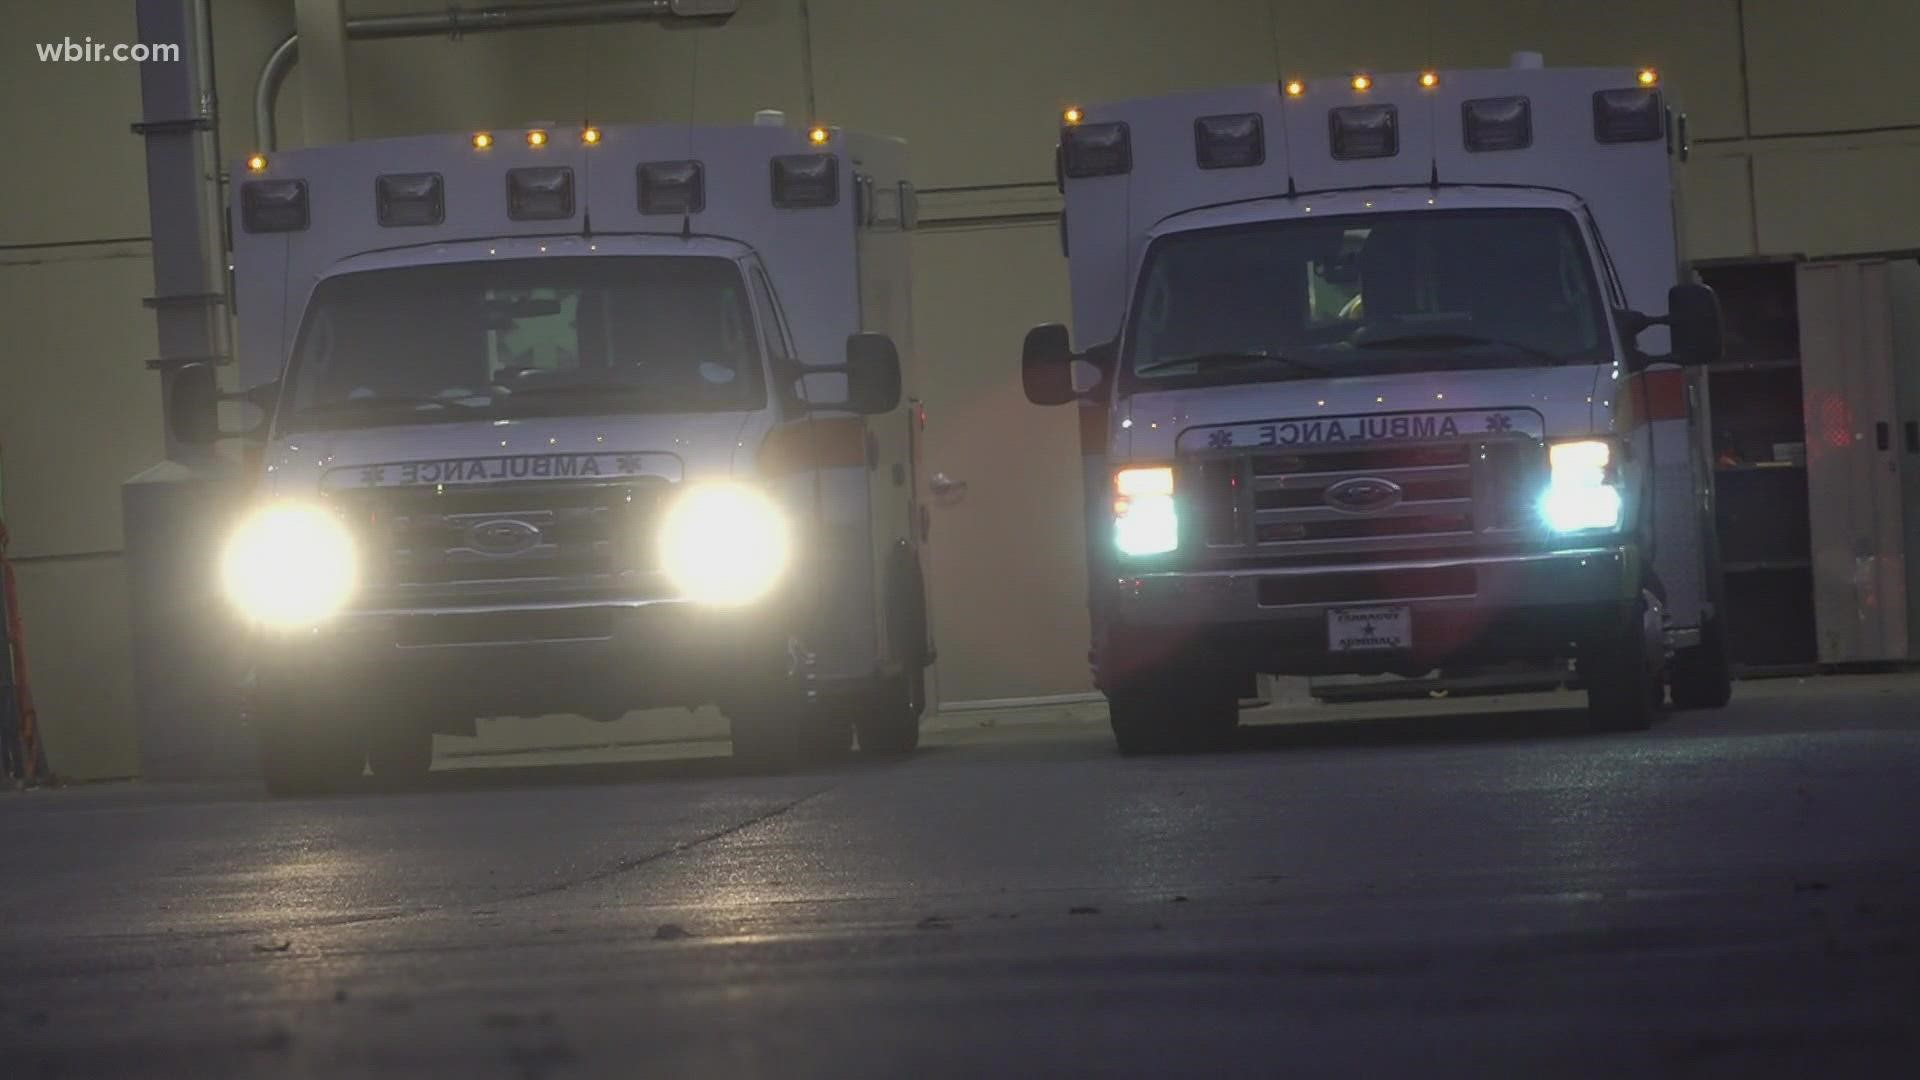 Knox Co. Commissioners approved forgiving more than $800,000 in fines owed by the county's ambulance provider.